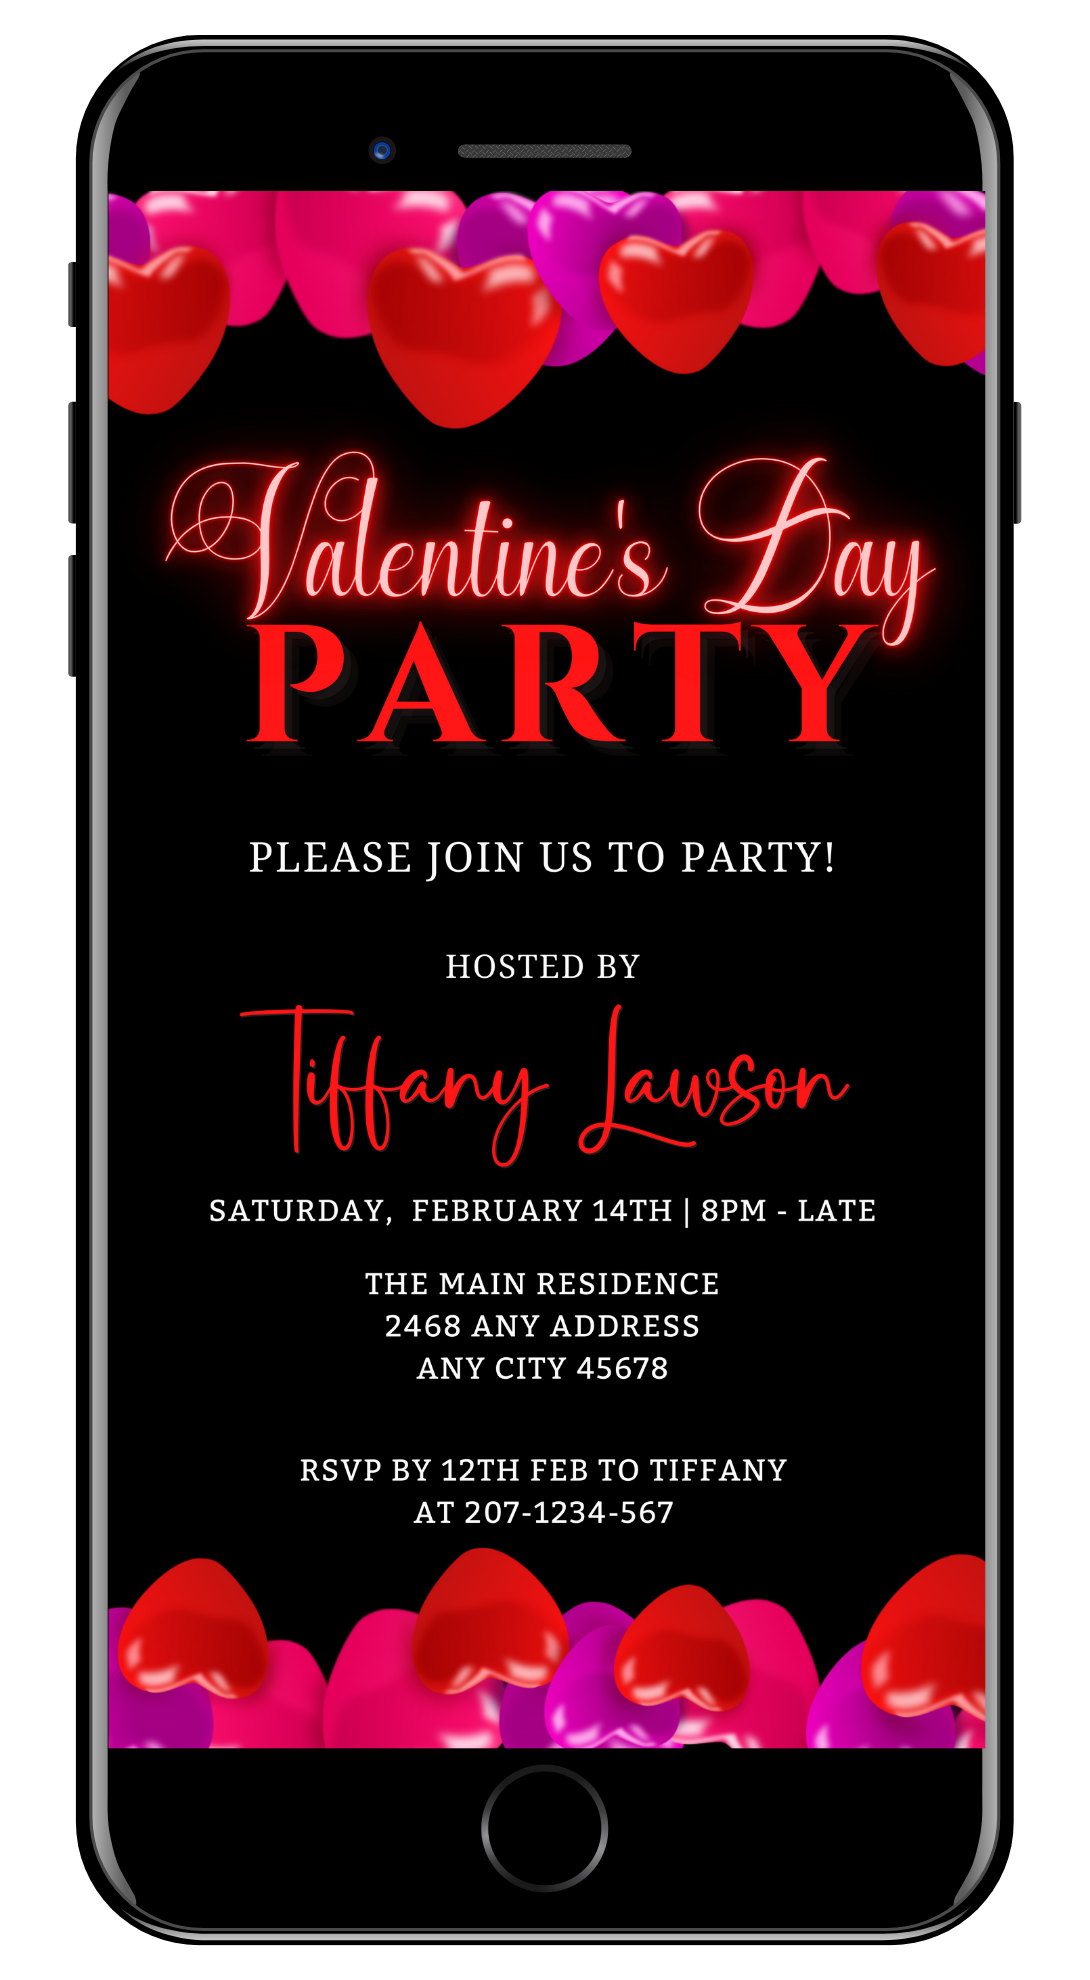 Editable Digital Black Pink Red Hearts Valentine's Party Evite featuring customizable text and heart designs for smartphone use, downloadable and editable via Canva.